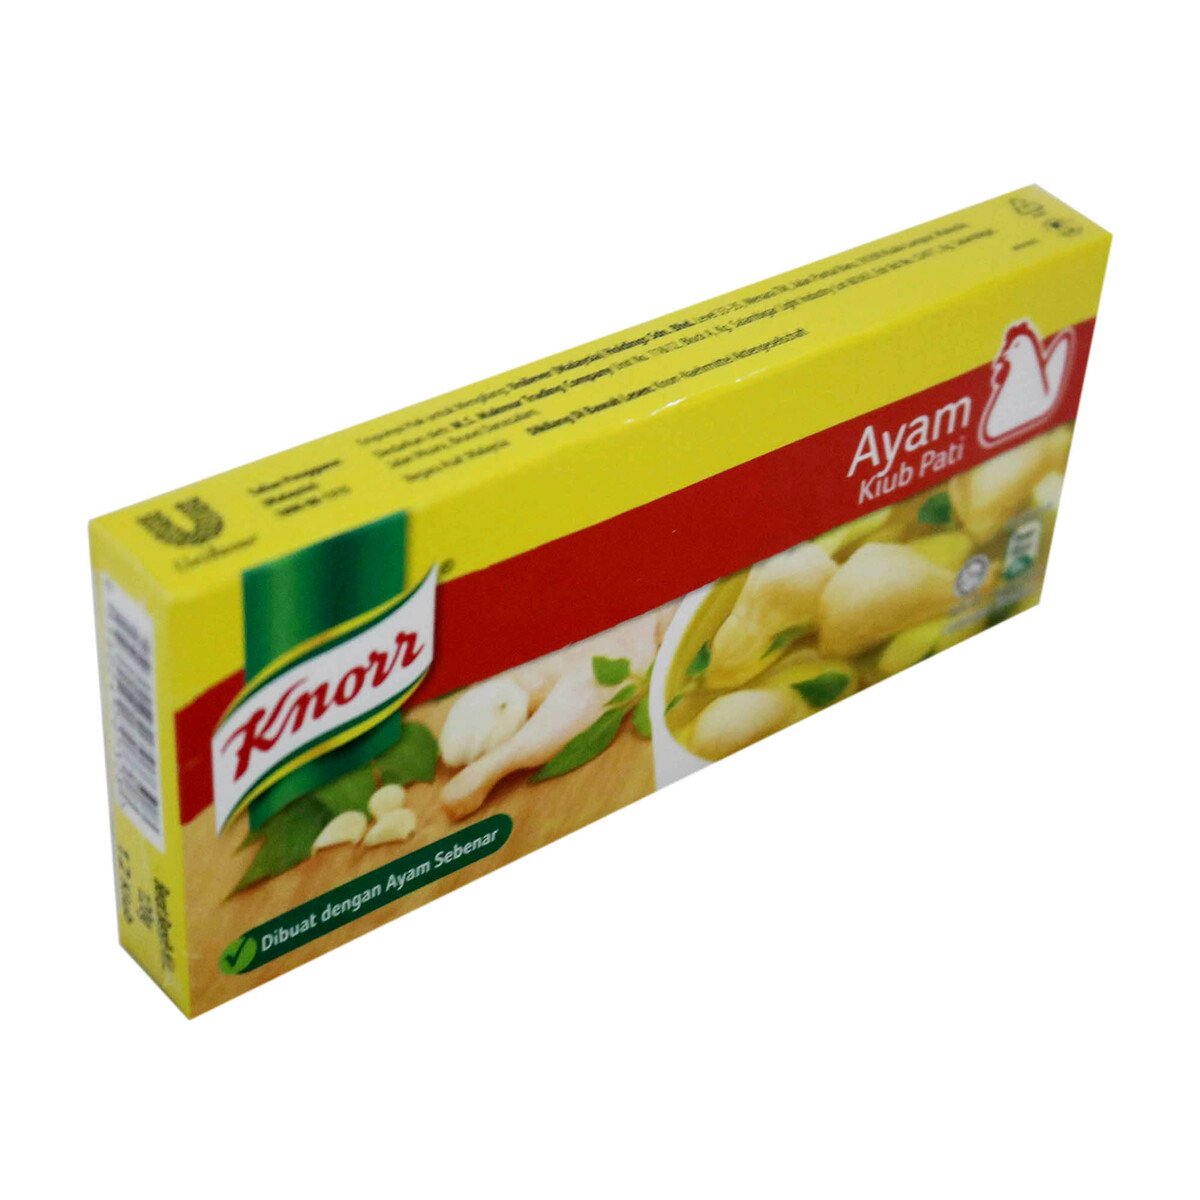 Knorr Cube Chicken 4 x 12cubes